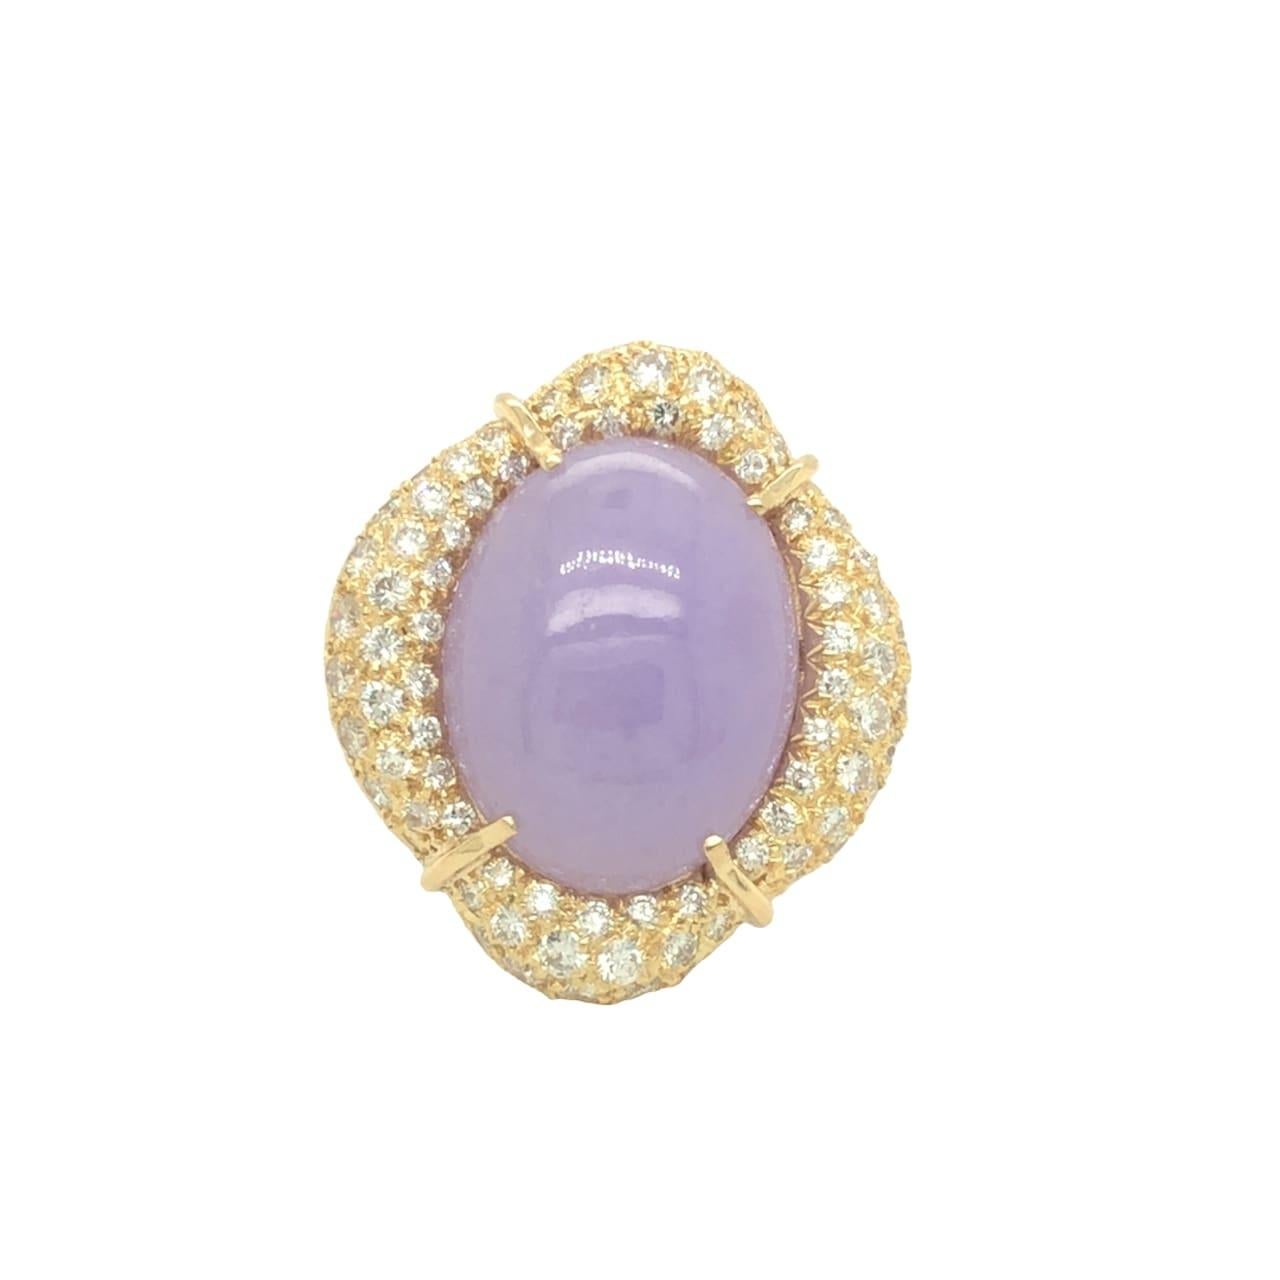 This exquisite convertible handcrafted 18k yellow gold ring features an oval shaped cabochon lavender jade. The center stone is enclosed in a unique design of 18K yellow gold with approximately 3.50 carats of round brilliant cut diamonds F color and